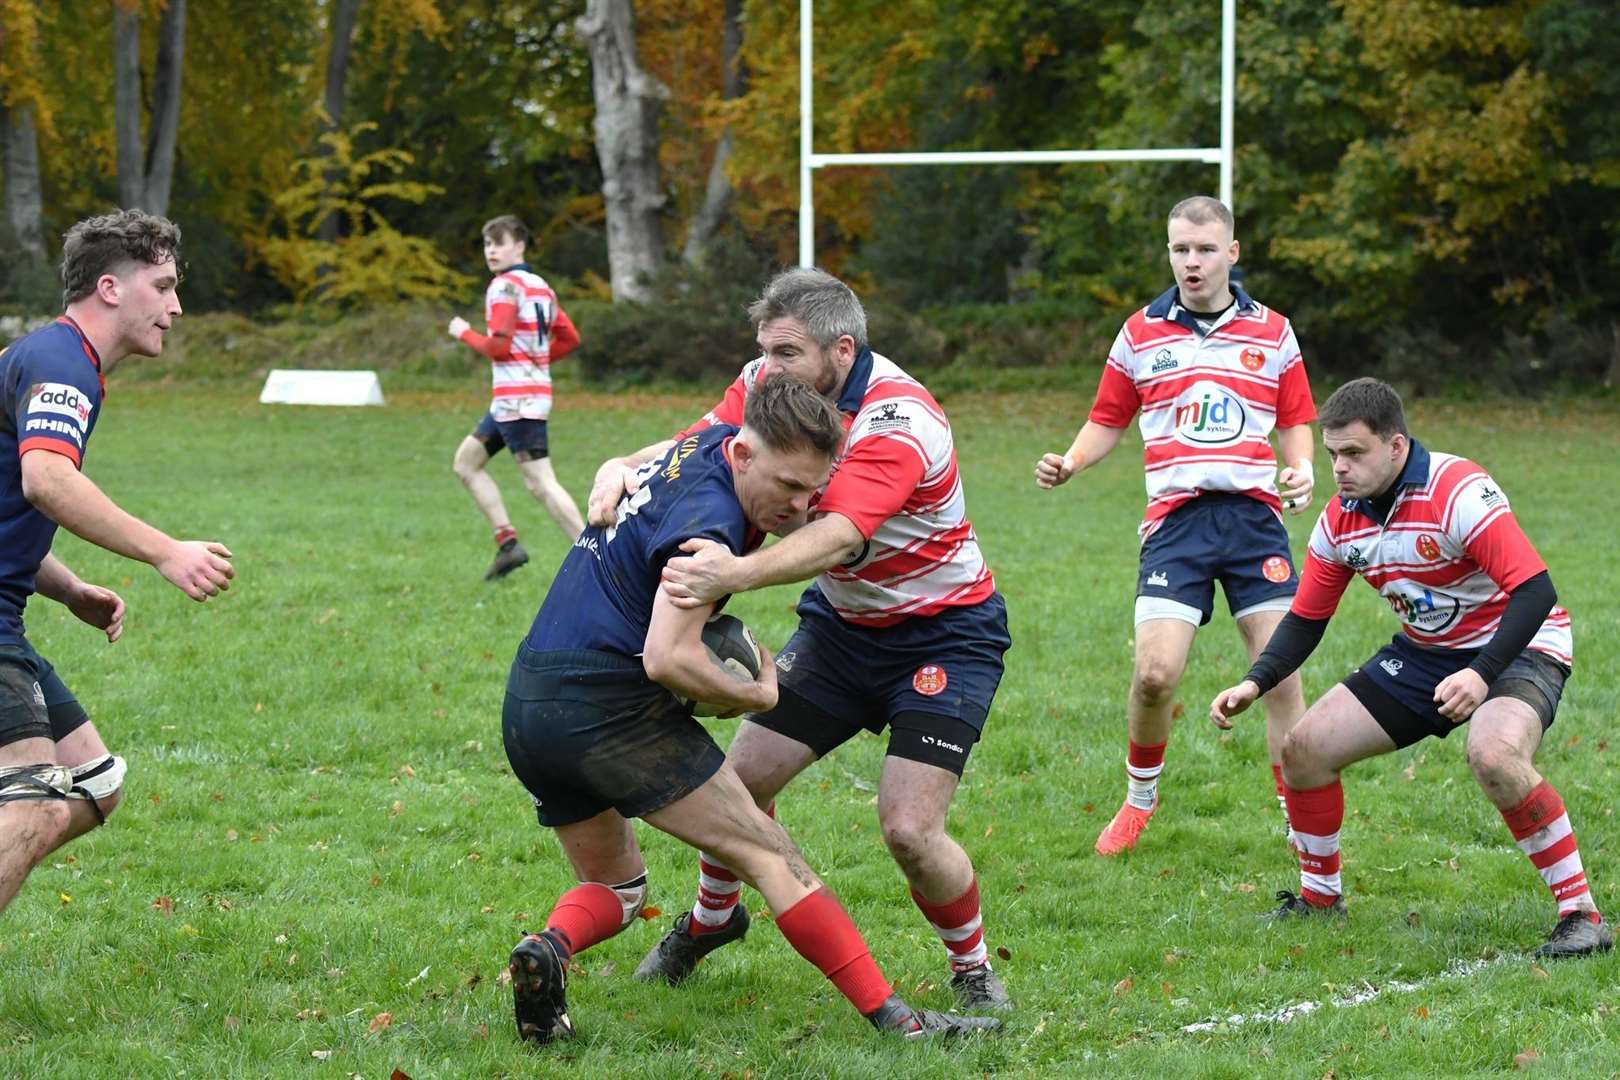 Chris Robottom stops attack. In the background are Gregor Hands and Lewis Hogg